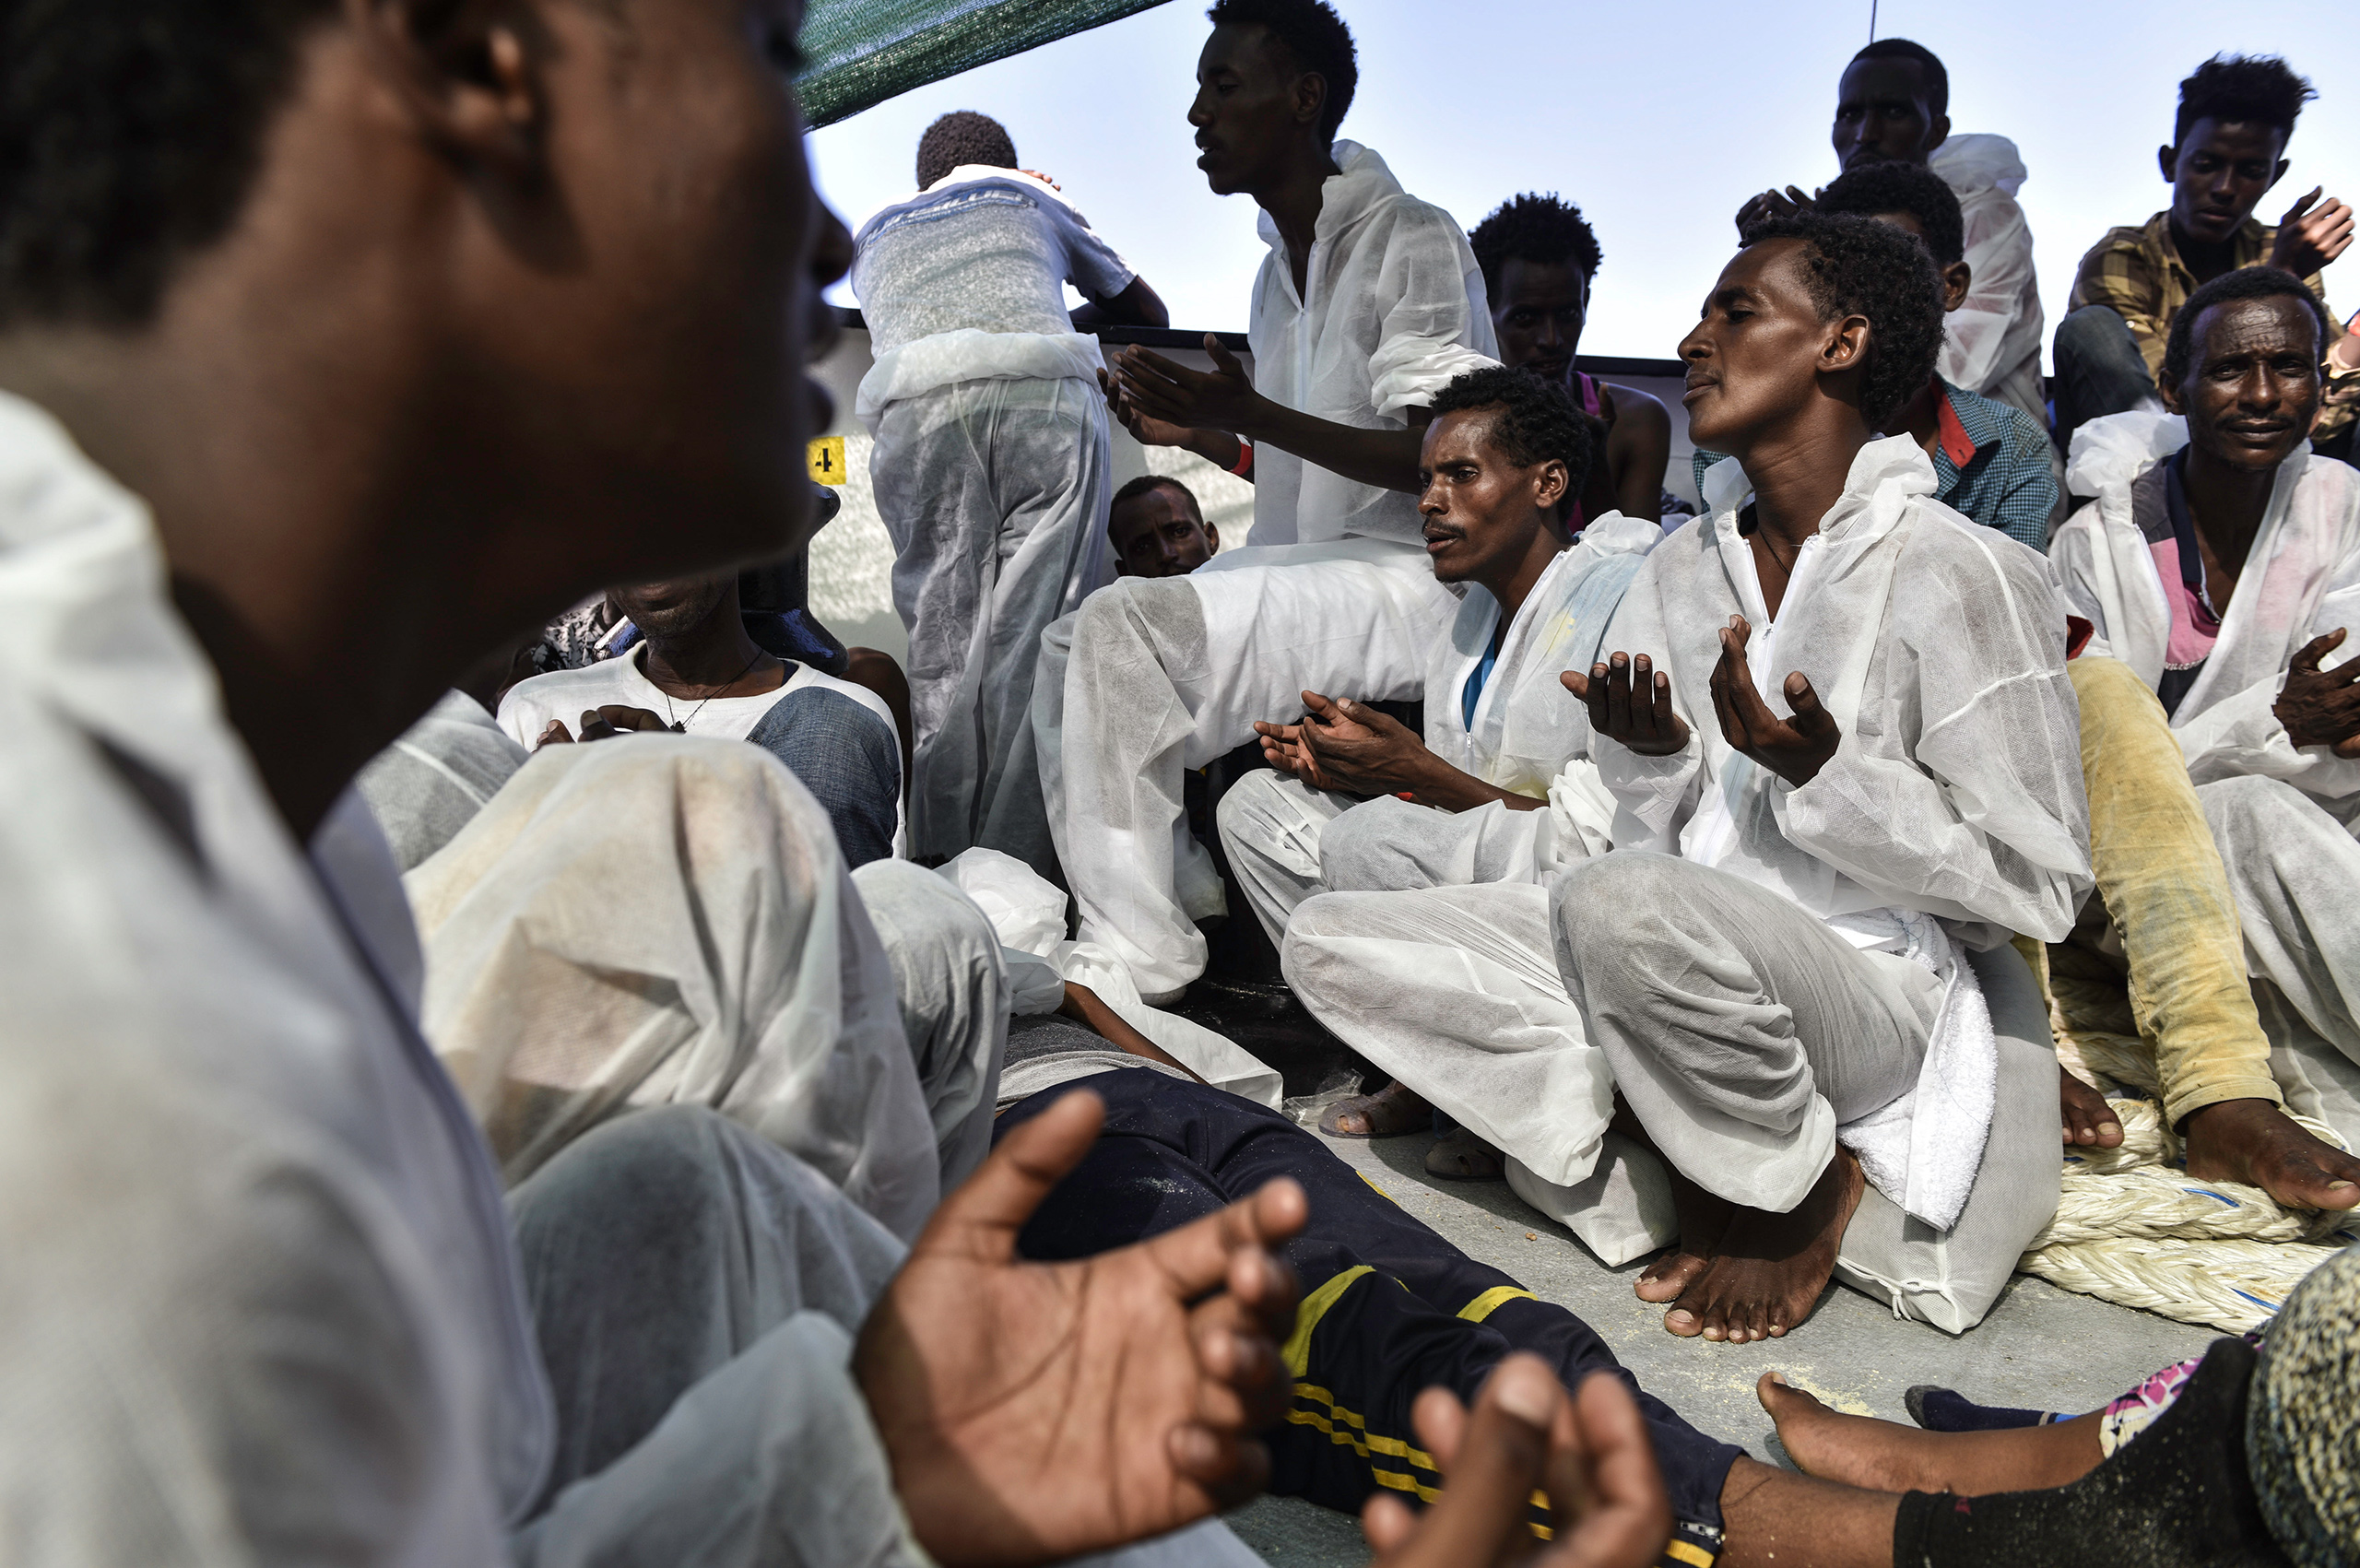 Eritrean Orthodox Christian men sing and pray after their rescue, Aug. 21, 2016. (Lynsey Addario—Getty Images Reportage for TIME)